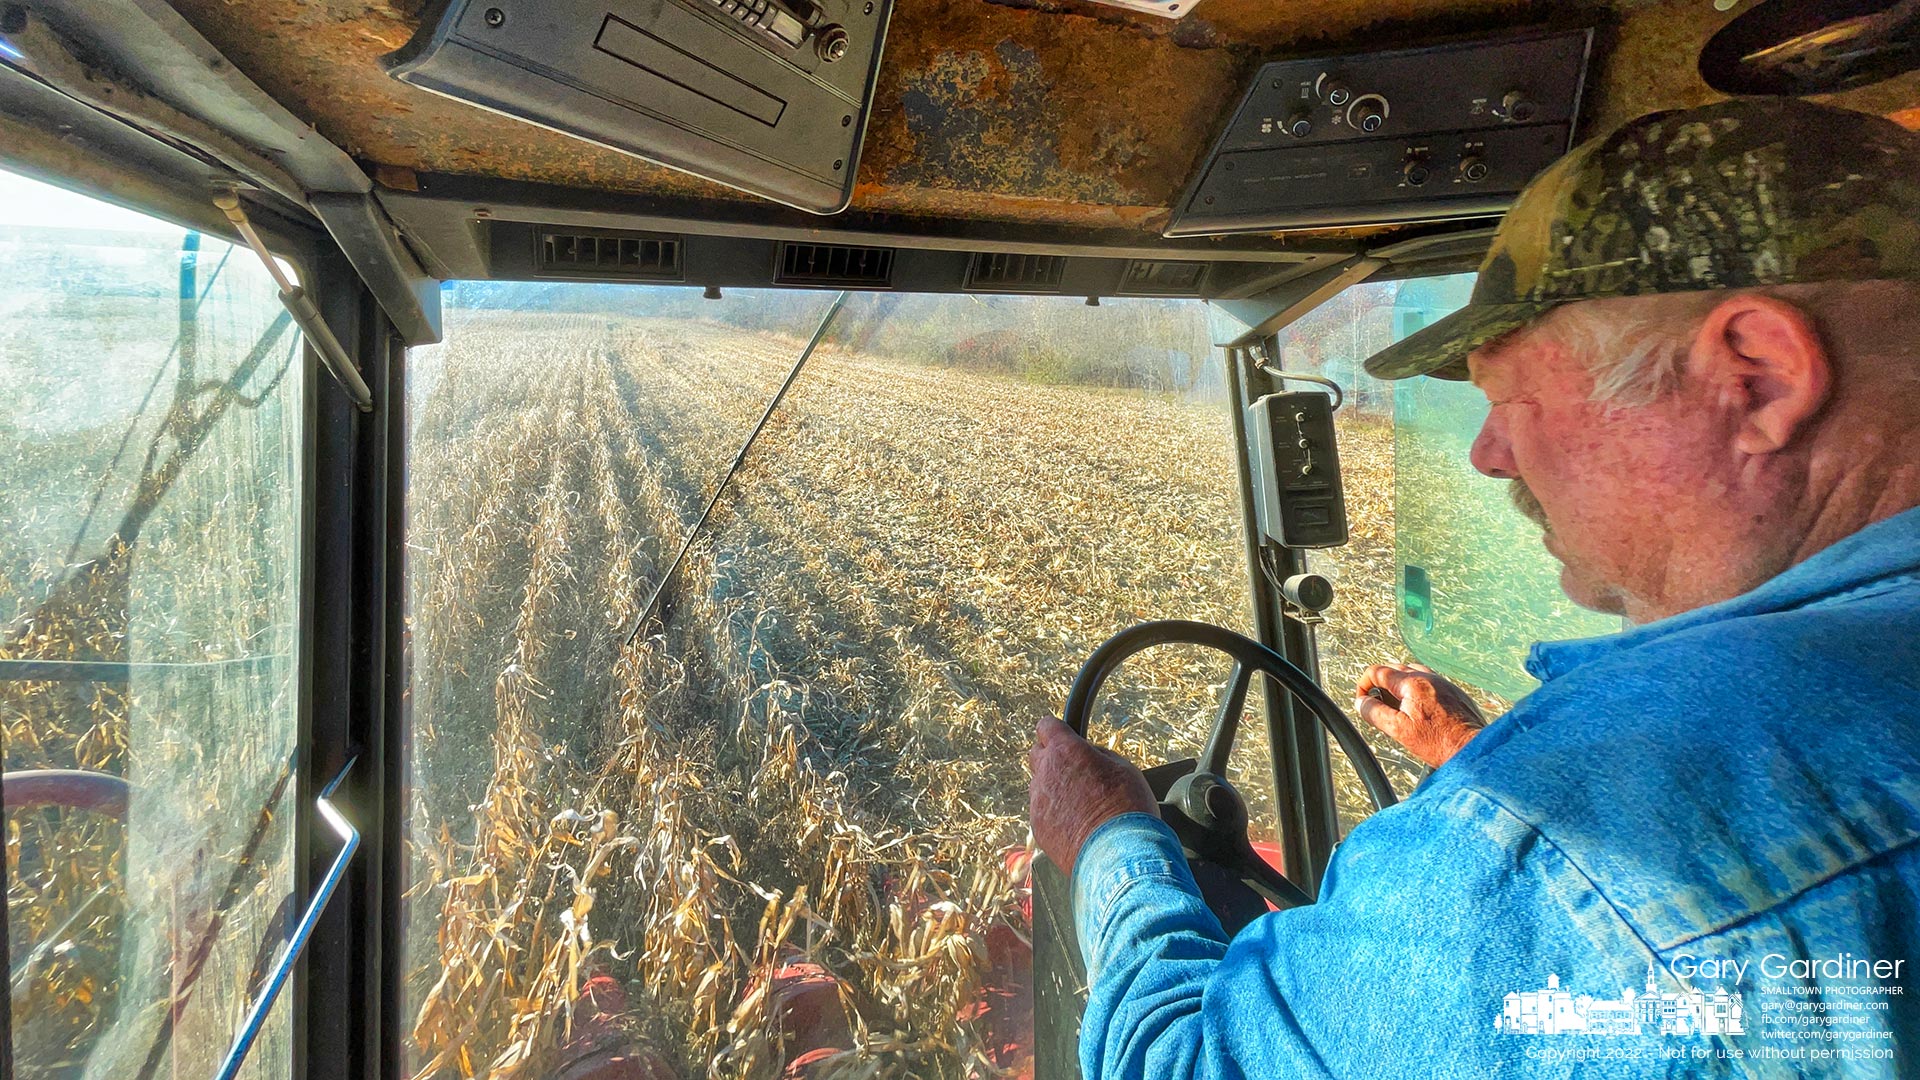 Kevin Scott runs his combine through the corn field at the Braun Farm hoping to complete the harvest before Thanksgiving. My Final Photo for November 22, 2022.